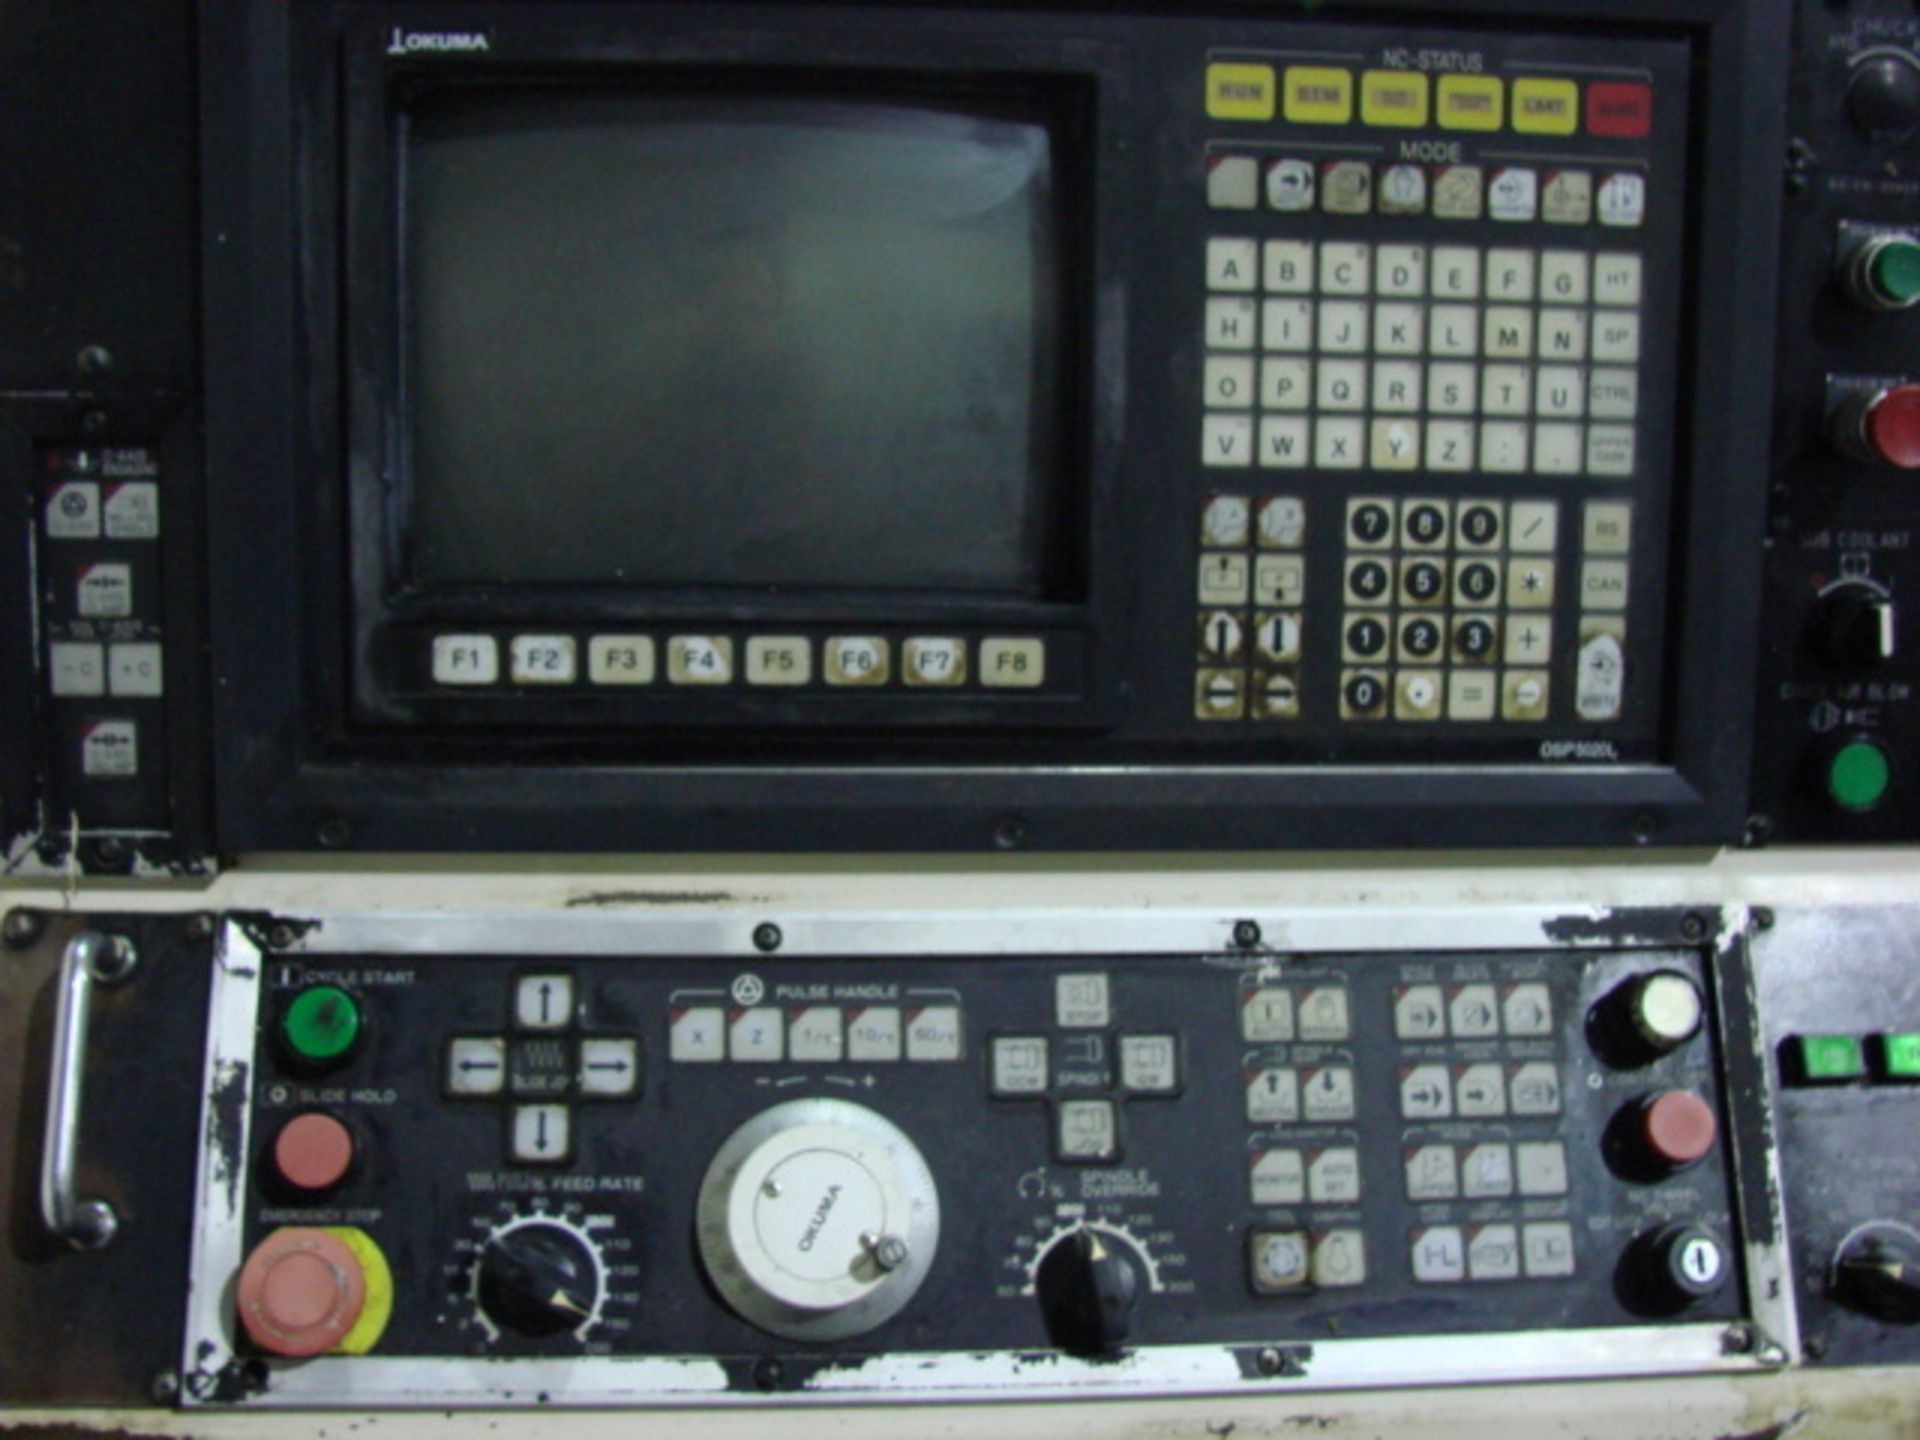 OKUMA LT25 5 AXIS TWO SPINDLE/TWO TURRET CNC LATHE, SERIAL NUMBER 0612-0012, YEAR 1995, LOCATION TN - Image 3 of 3